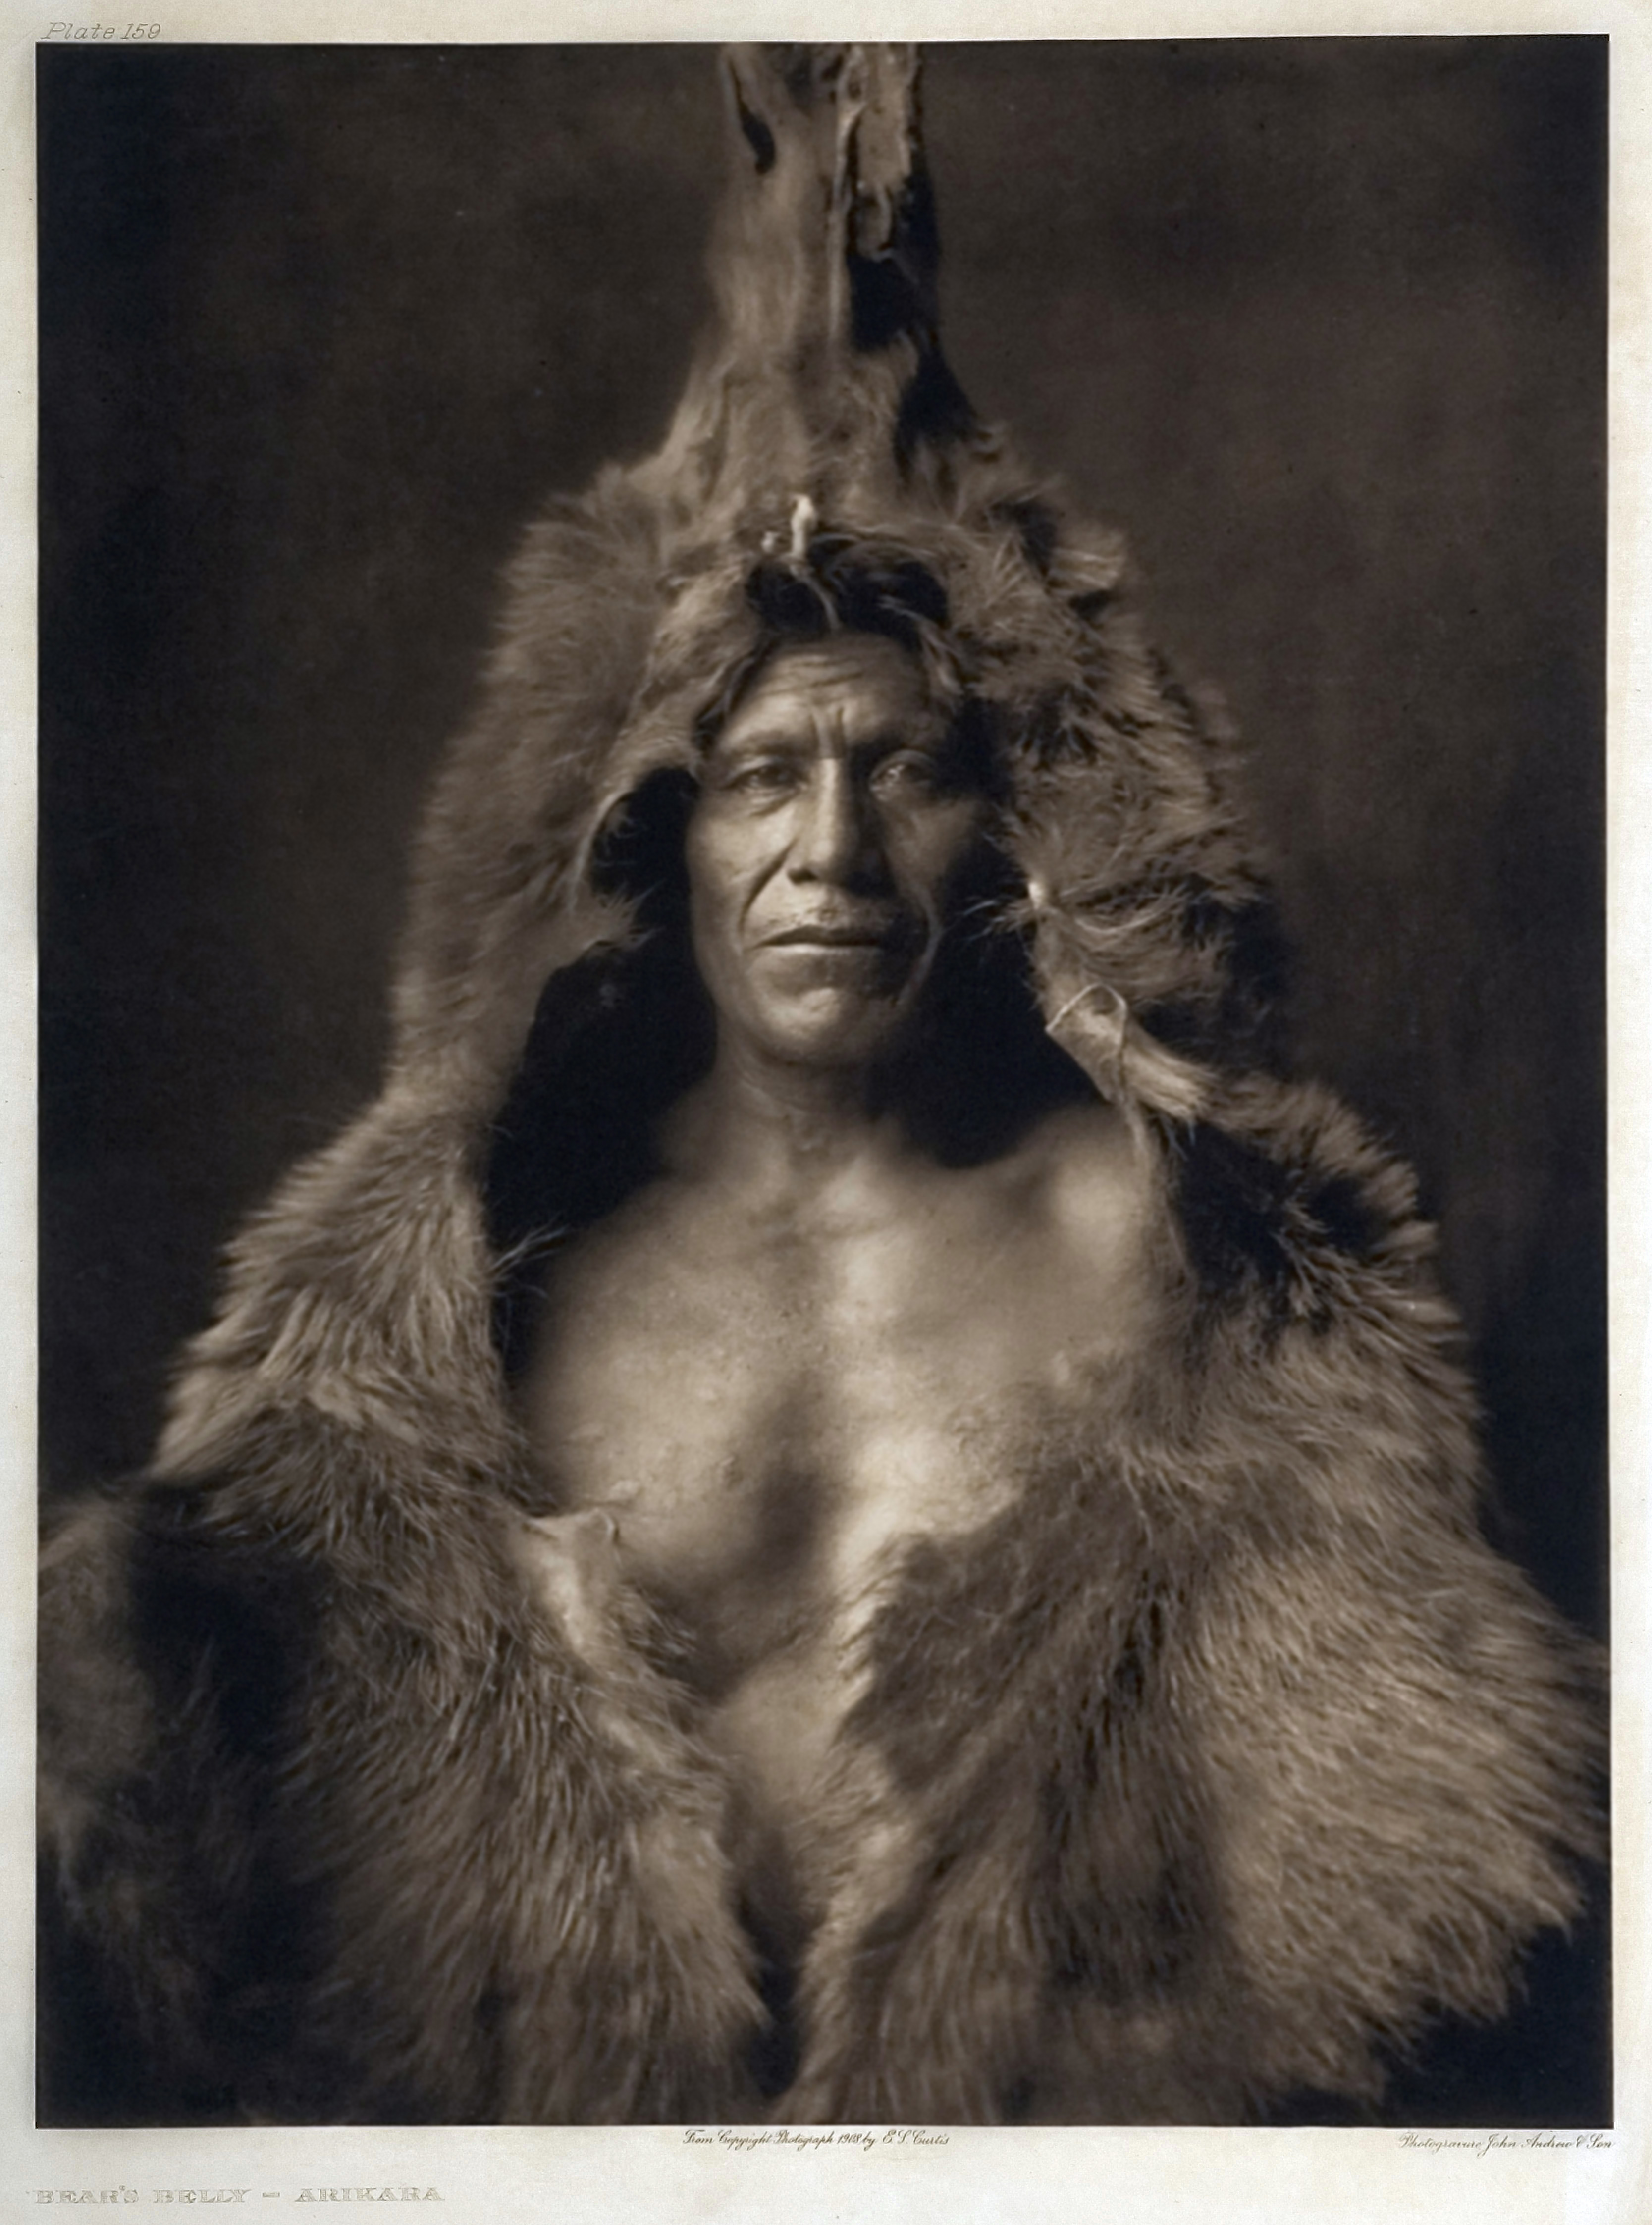 Bear's Belly by Edward Curtis, 1908